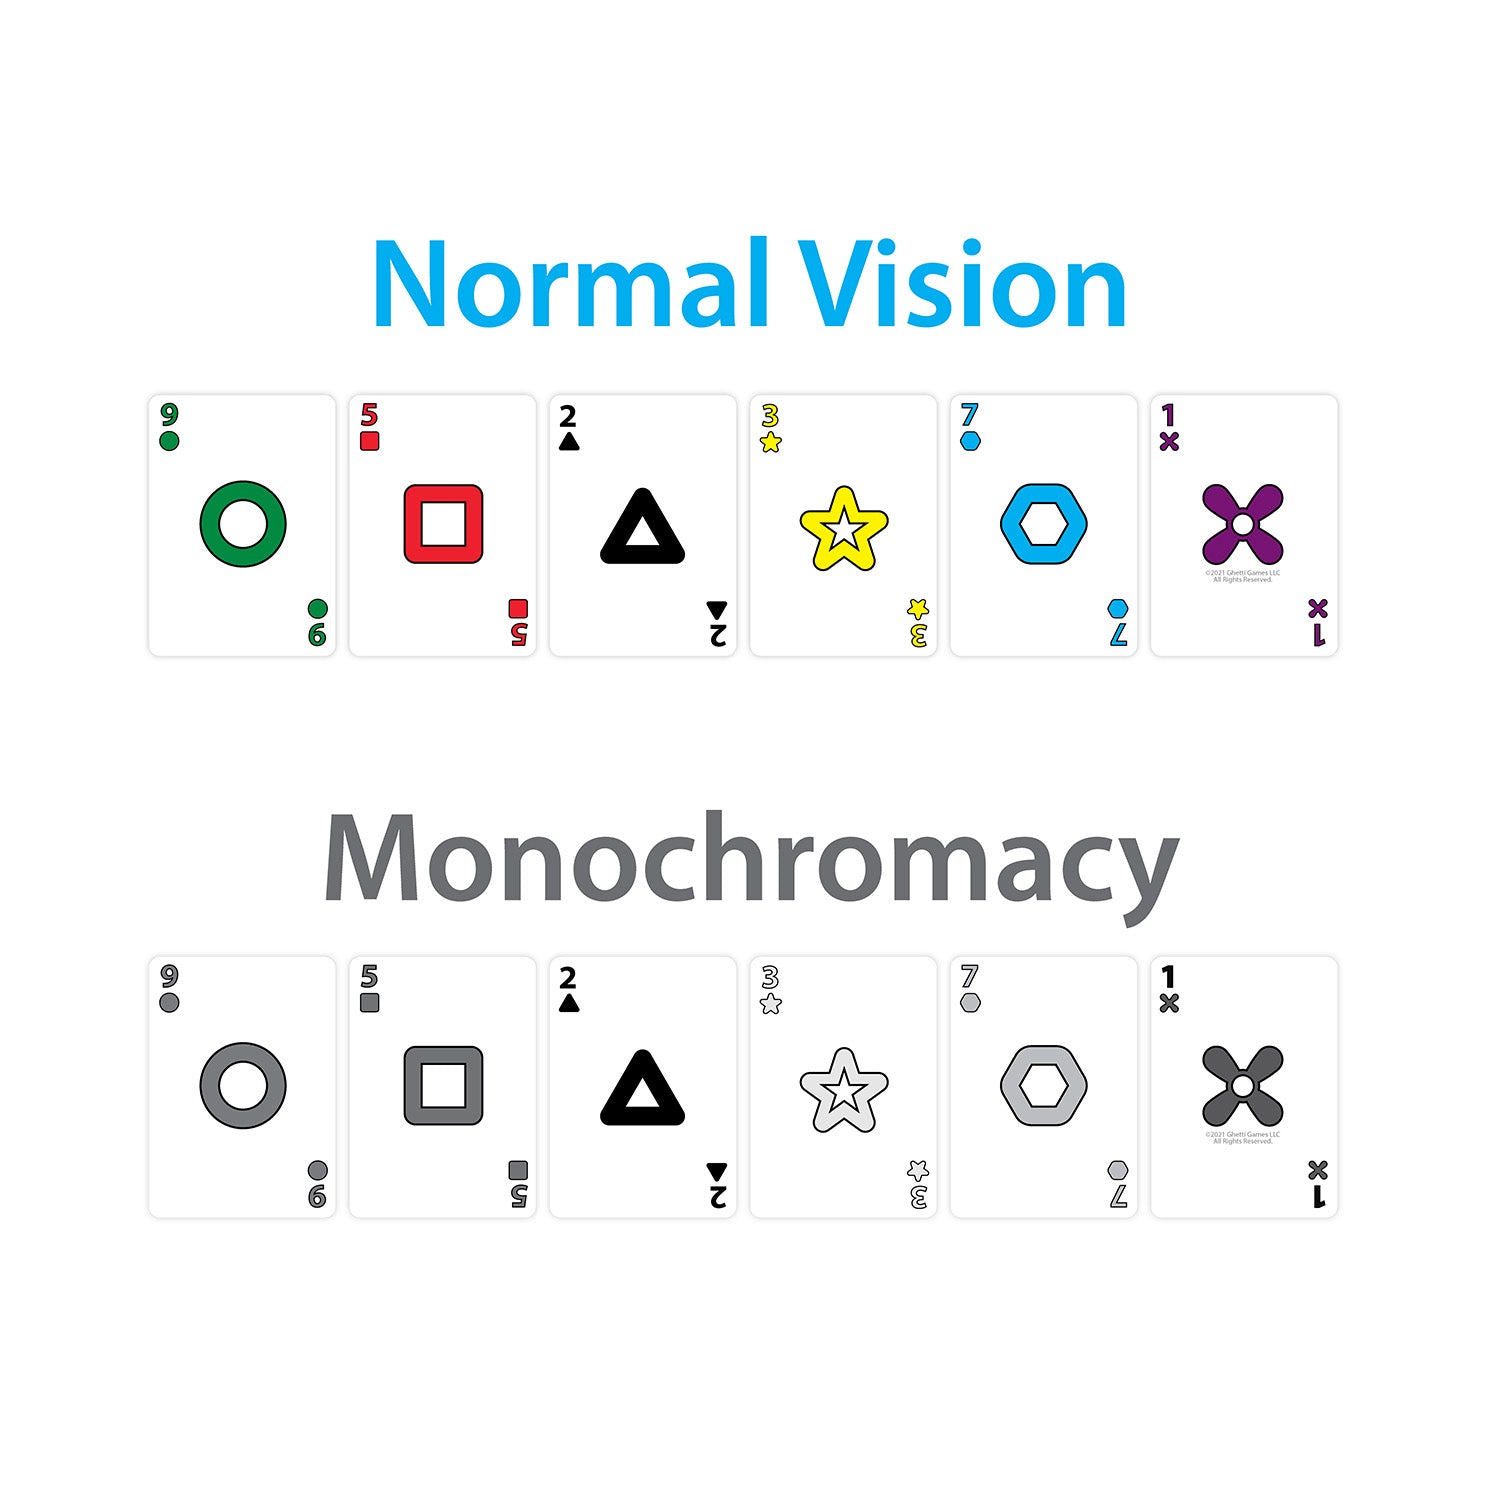 Normal Vision: 6 cards, each with a different color and shape. Monochromacy: The same 6 cards shown in shades of gray.